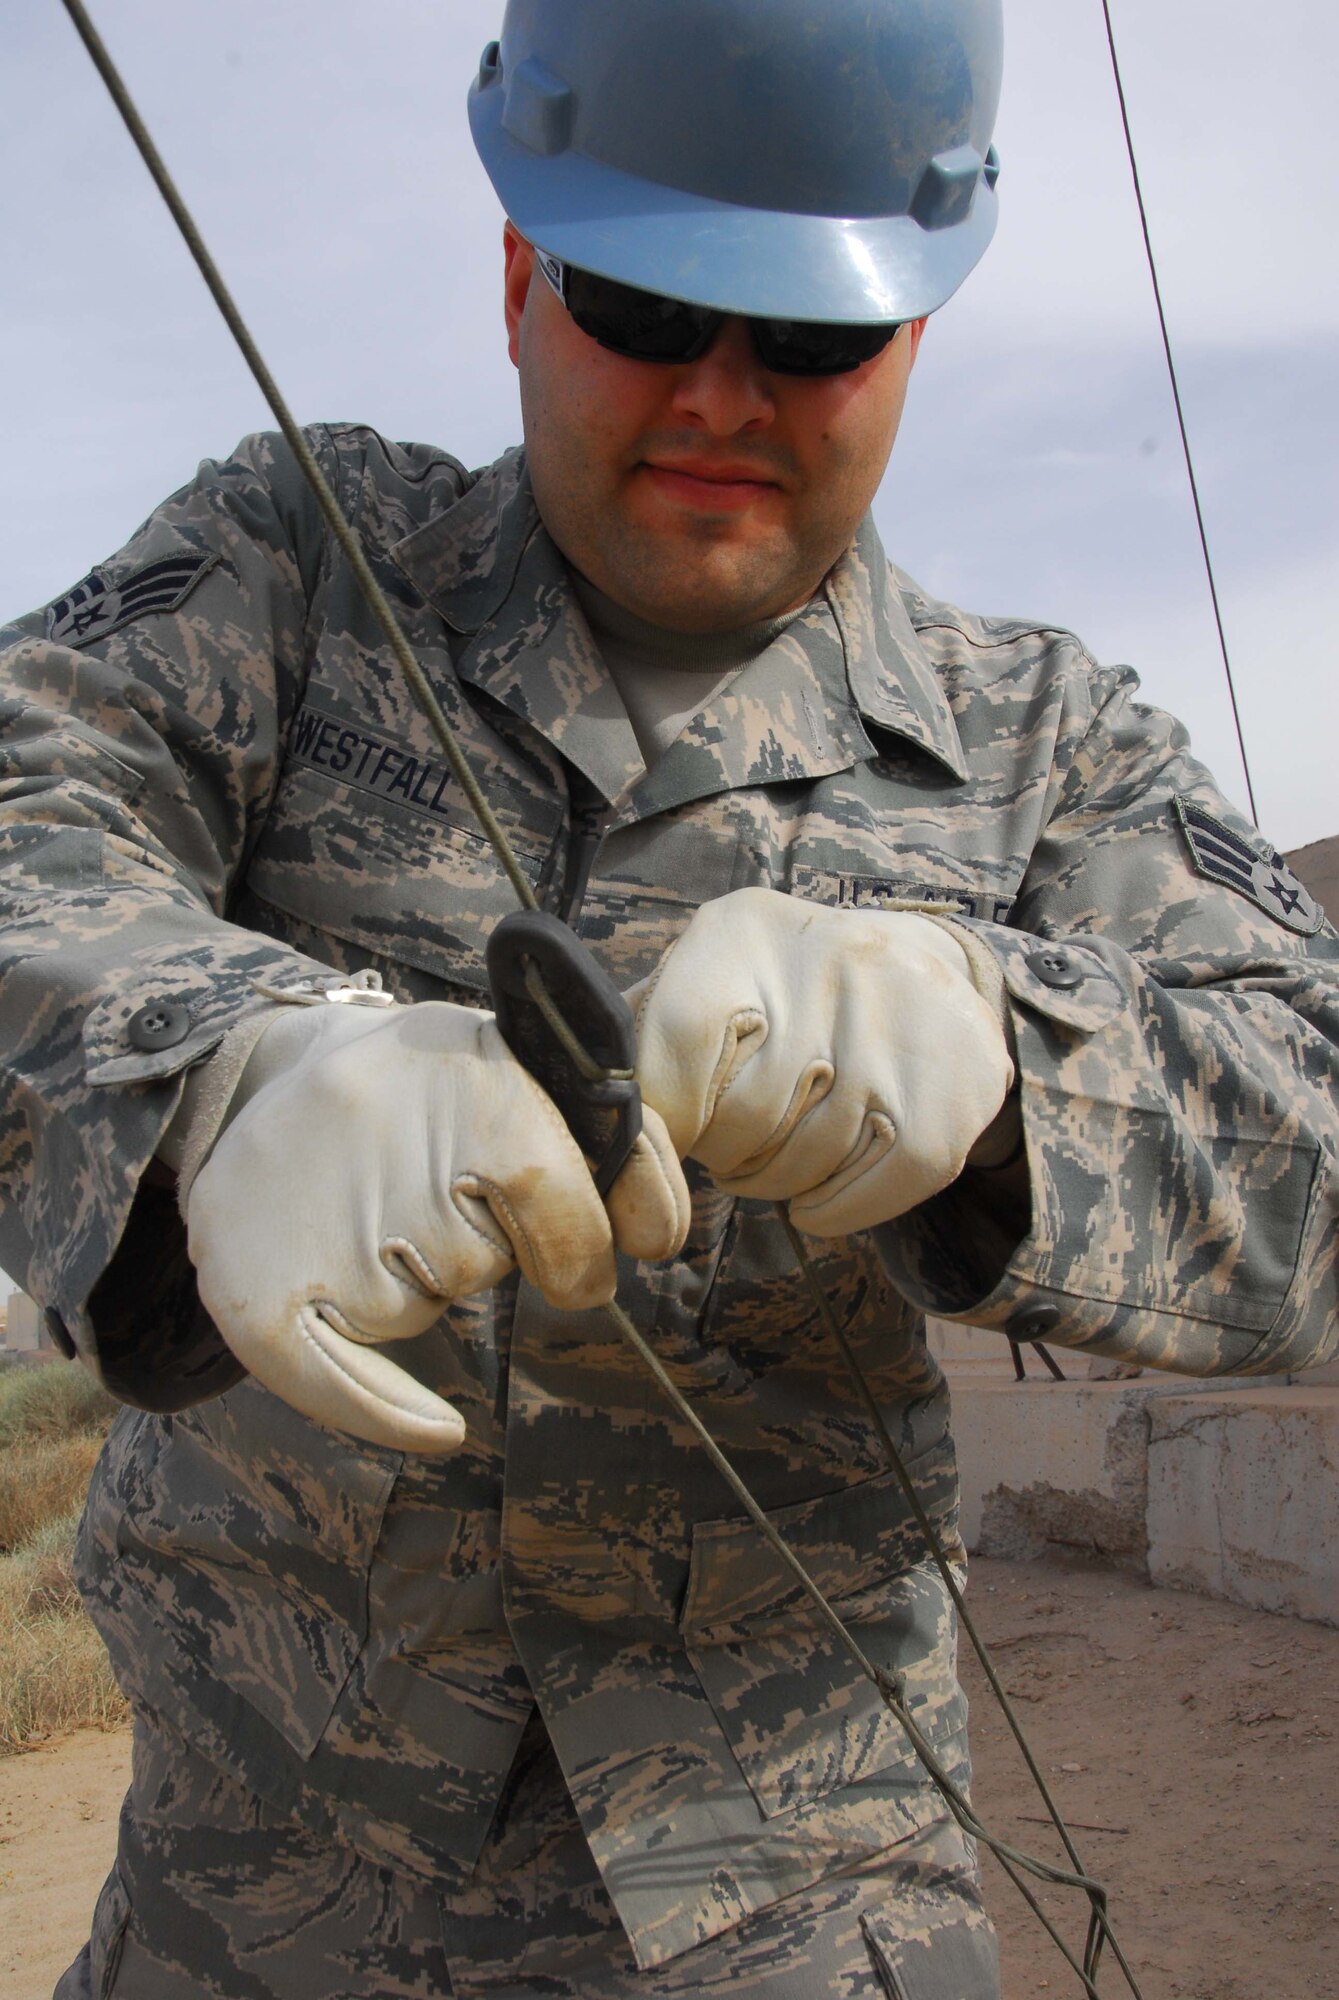 SOUTHWEST ASIA -- Senior Airman Stephon Westfall, 386th Expeditionary Communications Squadron, tightens the one of nine guide wires to steady the Collapsible Tube Mast telescoping antenna mast at an air base in Southwest Asia, Feb. 26. When pulled tightly, the nine guide wires will hold the antenna steady and not allow it to move during a wind or sand storm. Airman Westfall is currently deployed from the 141st Air Refueling Wing, an Air National Guard unit, at Fairchild Air Force Base, Wash., and is originally from Spokane, Wash. (U.S. Air Force photo/ Senior Airman Courtney Richardson)